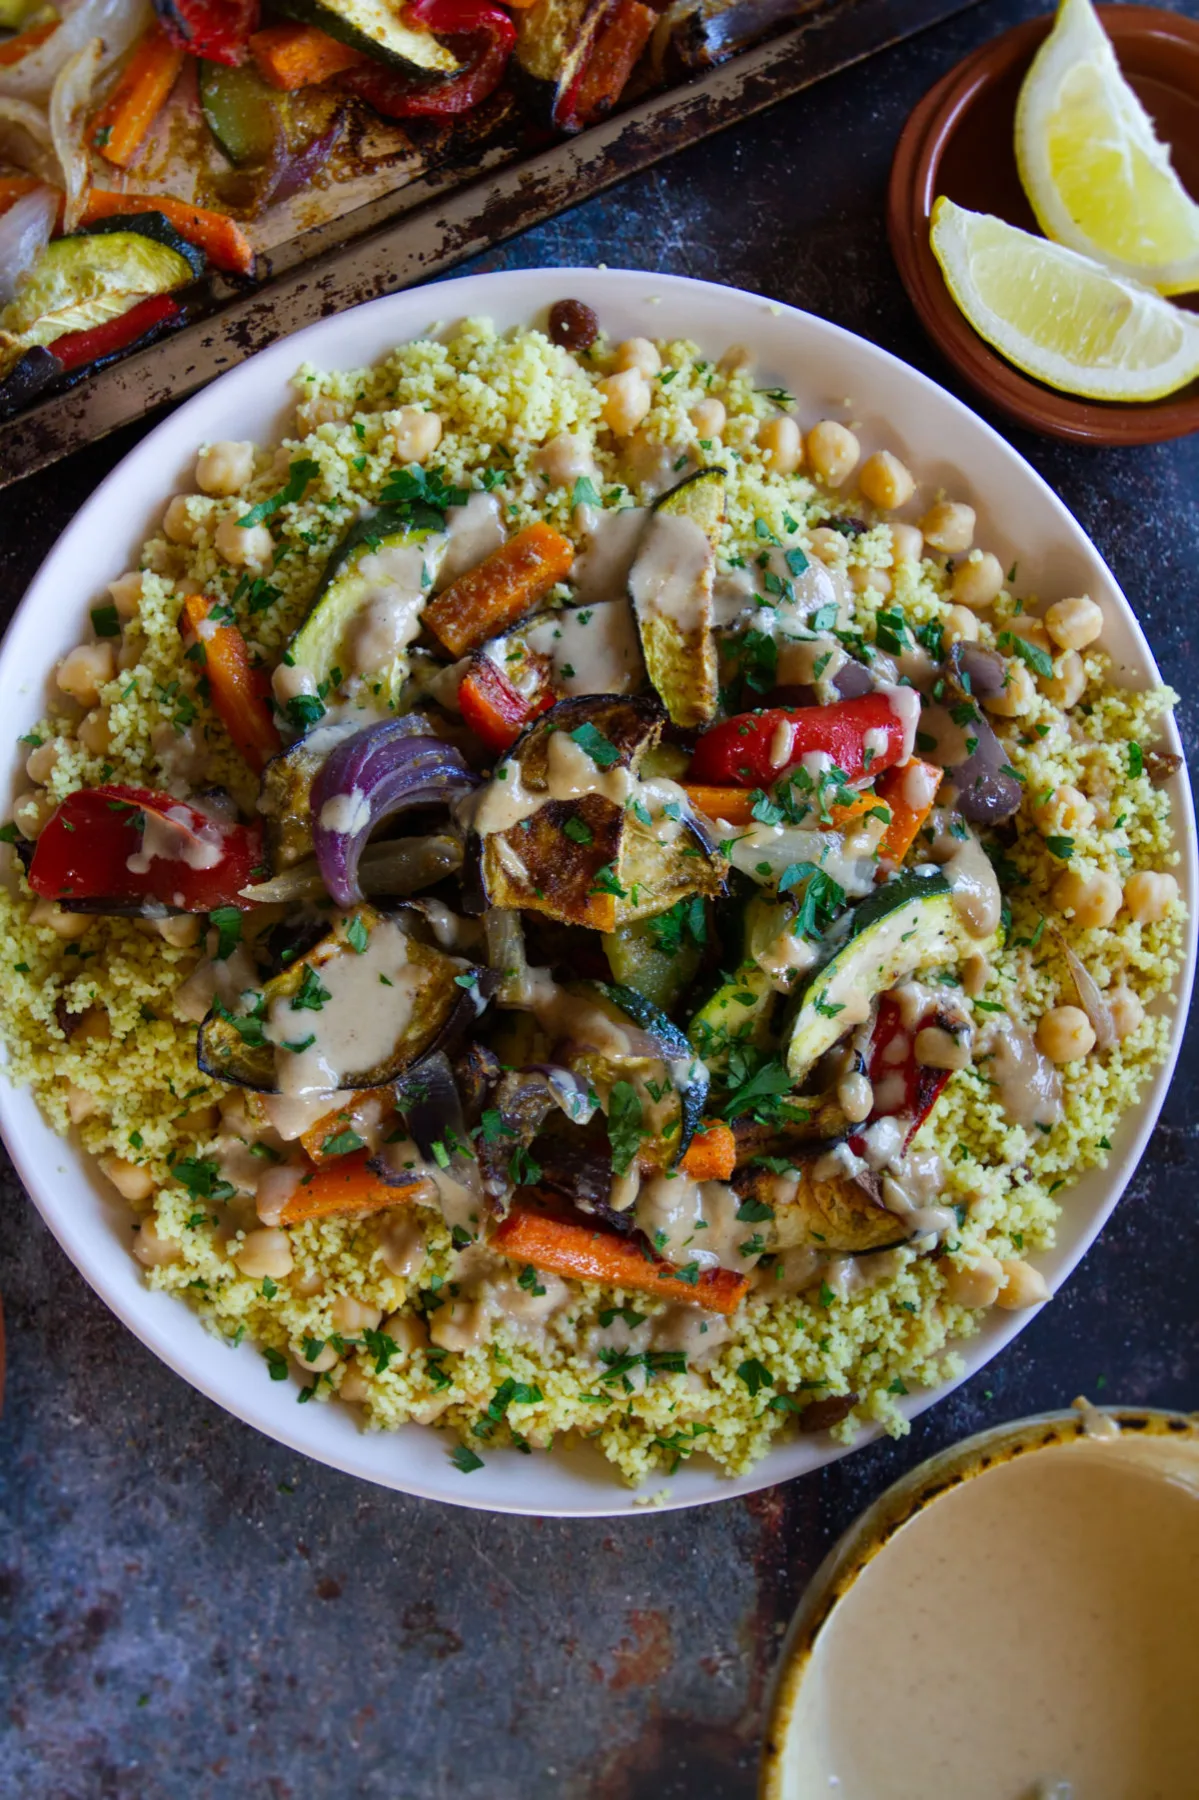 A large plate of Moroccan couscous with roast veggies and drizzled with a tahini dressing.